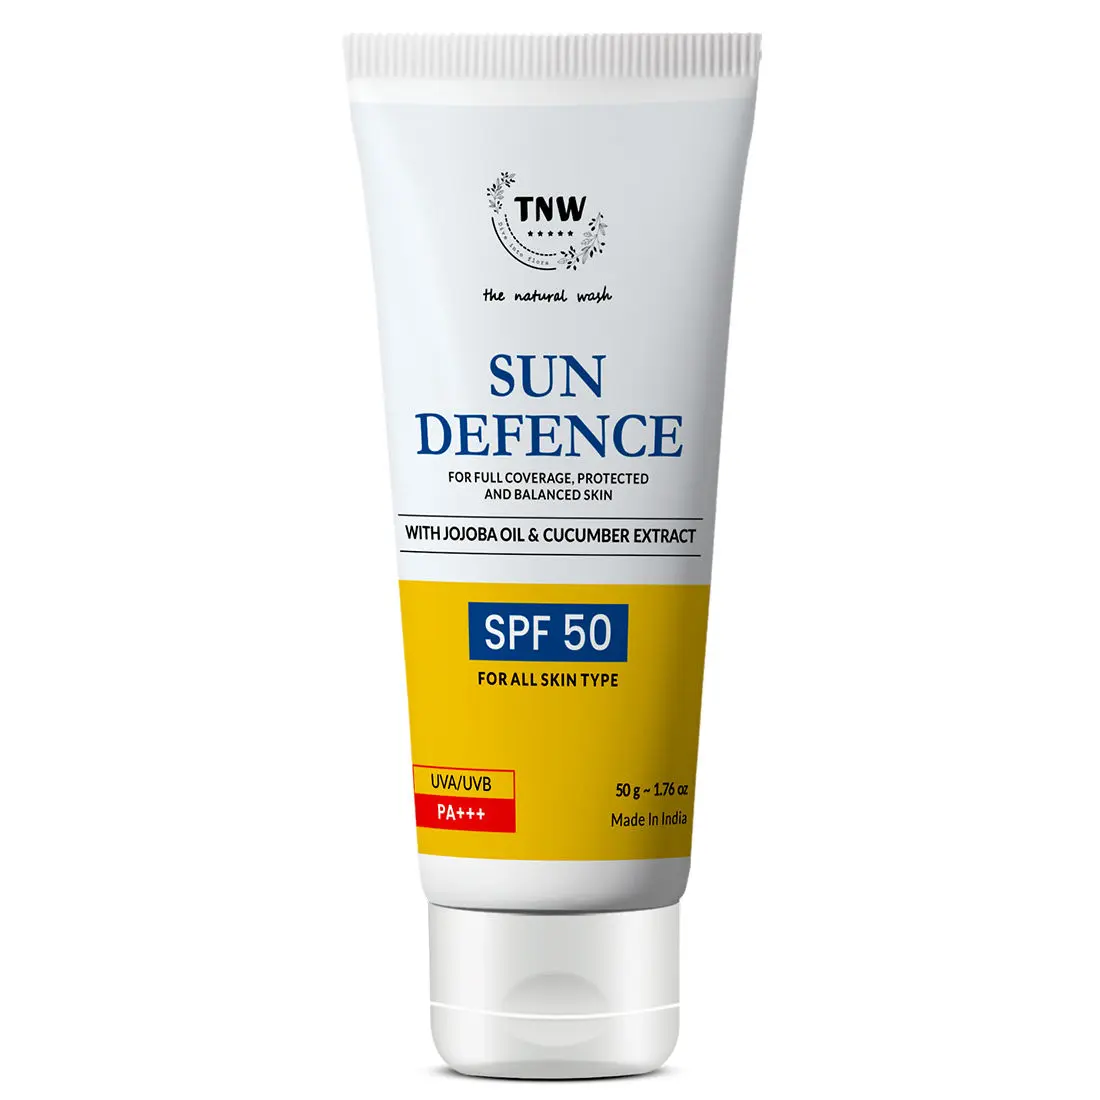 TNW - The Natural Wash Sun Defence Spf 50 Cream With Jojoba And Cucumber Extract (50 g)